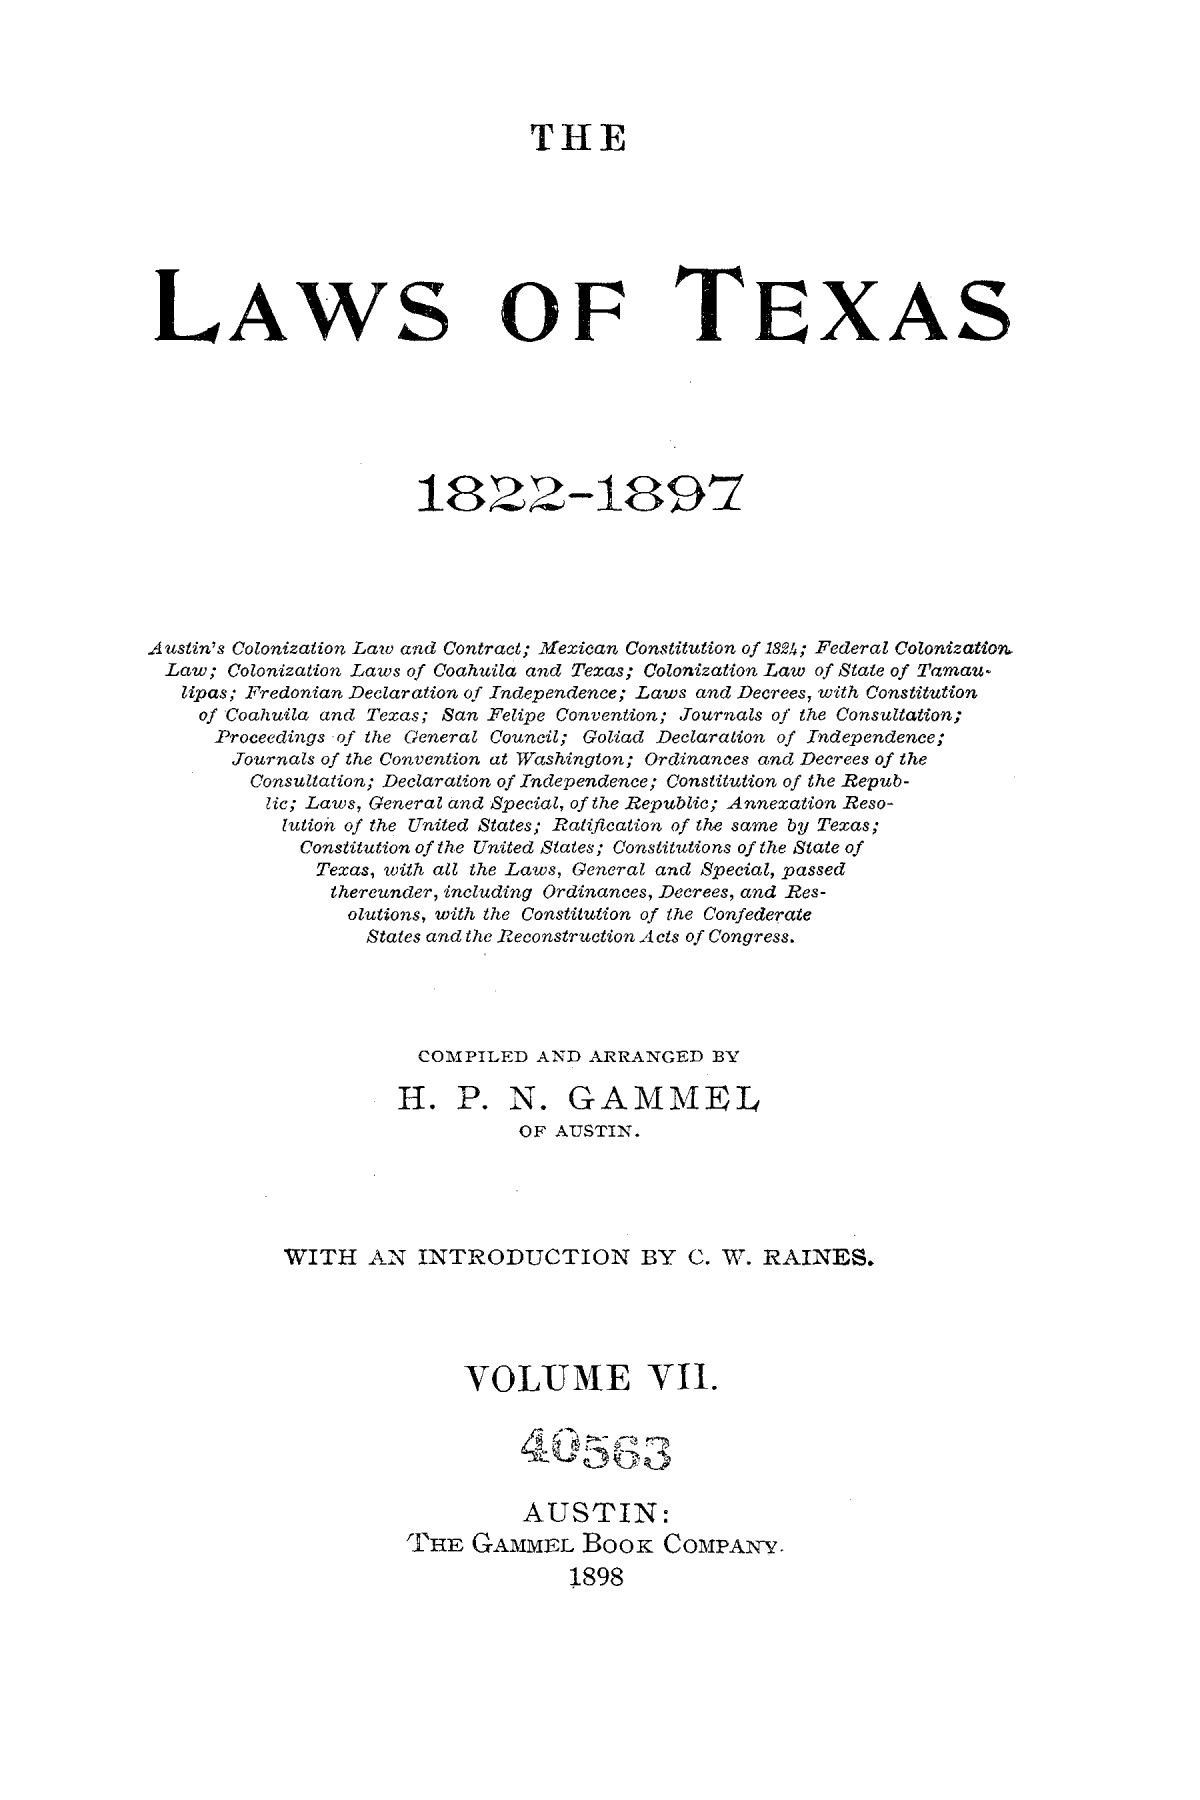 The Laws of Texas, 1822-1897 Volume 7
                                                
                                                    A
                                                